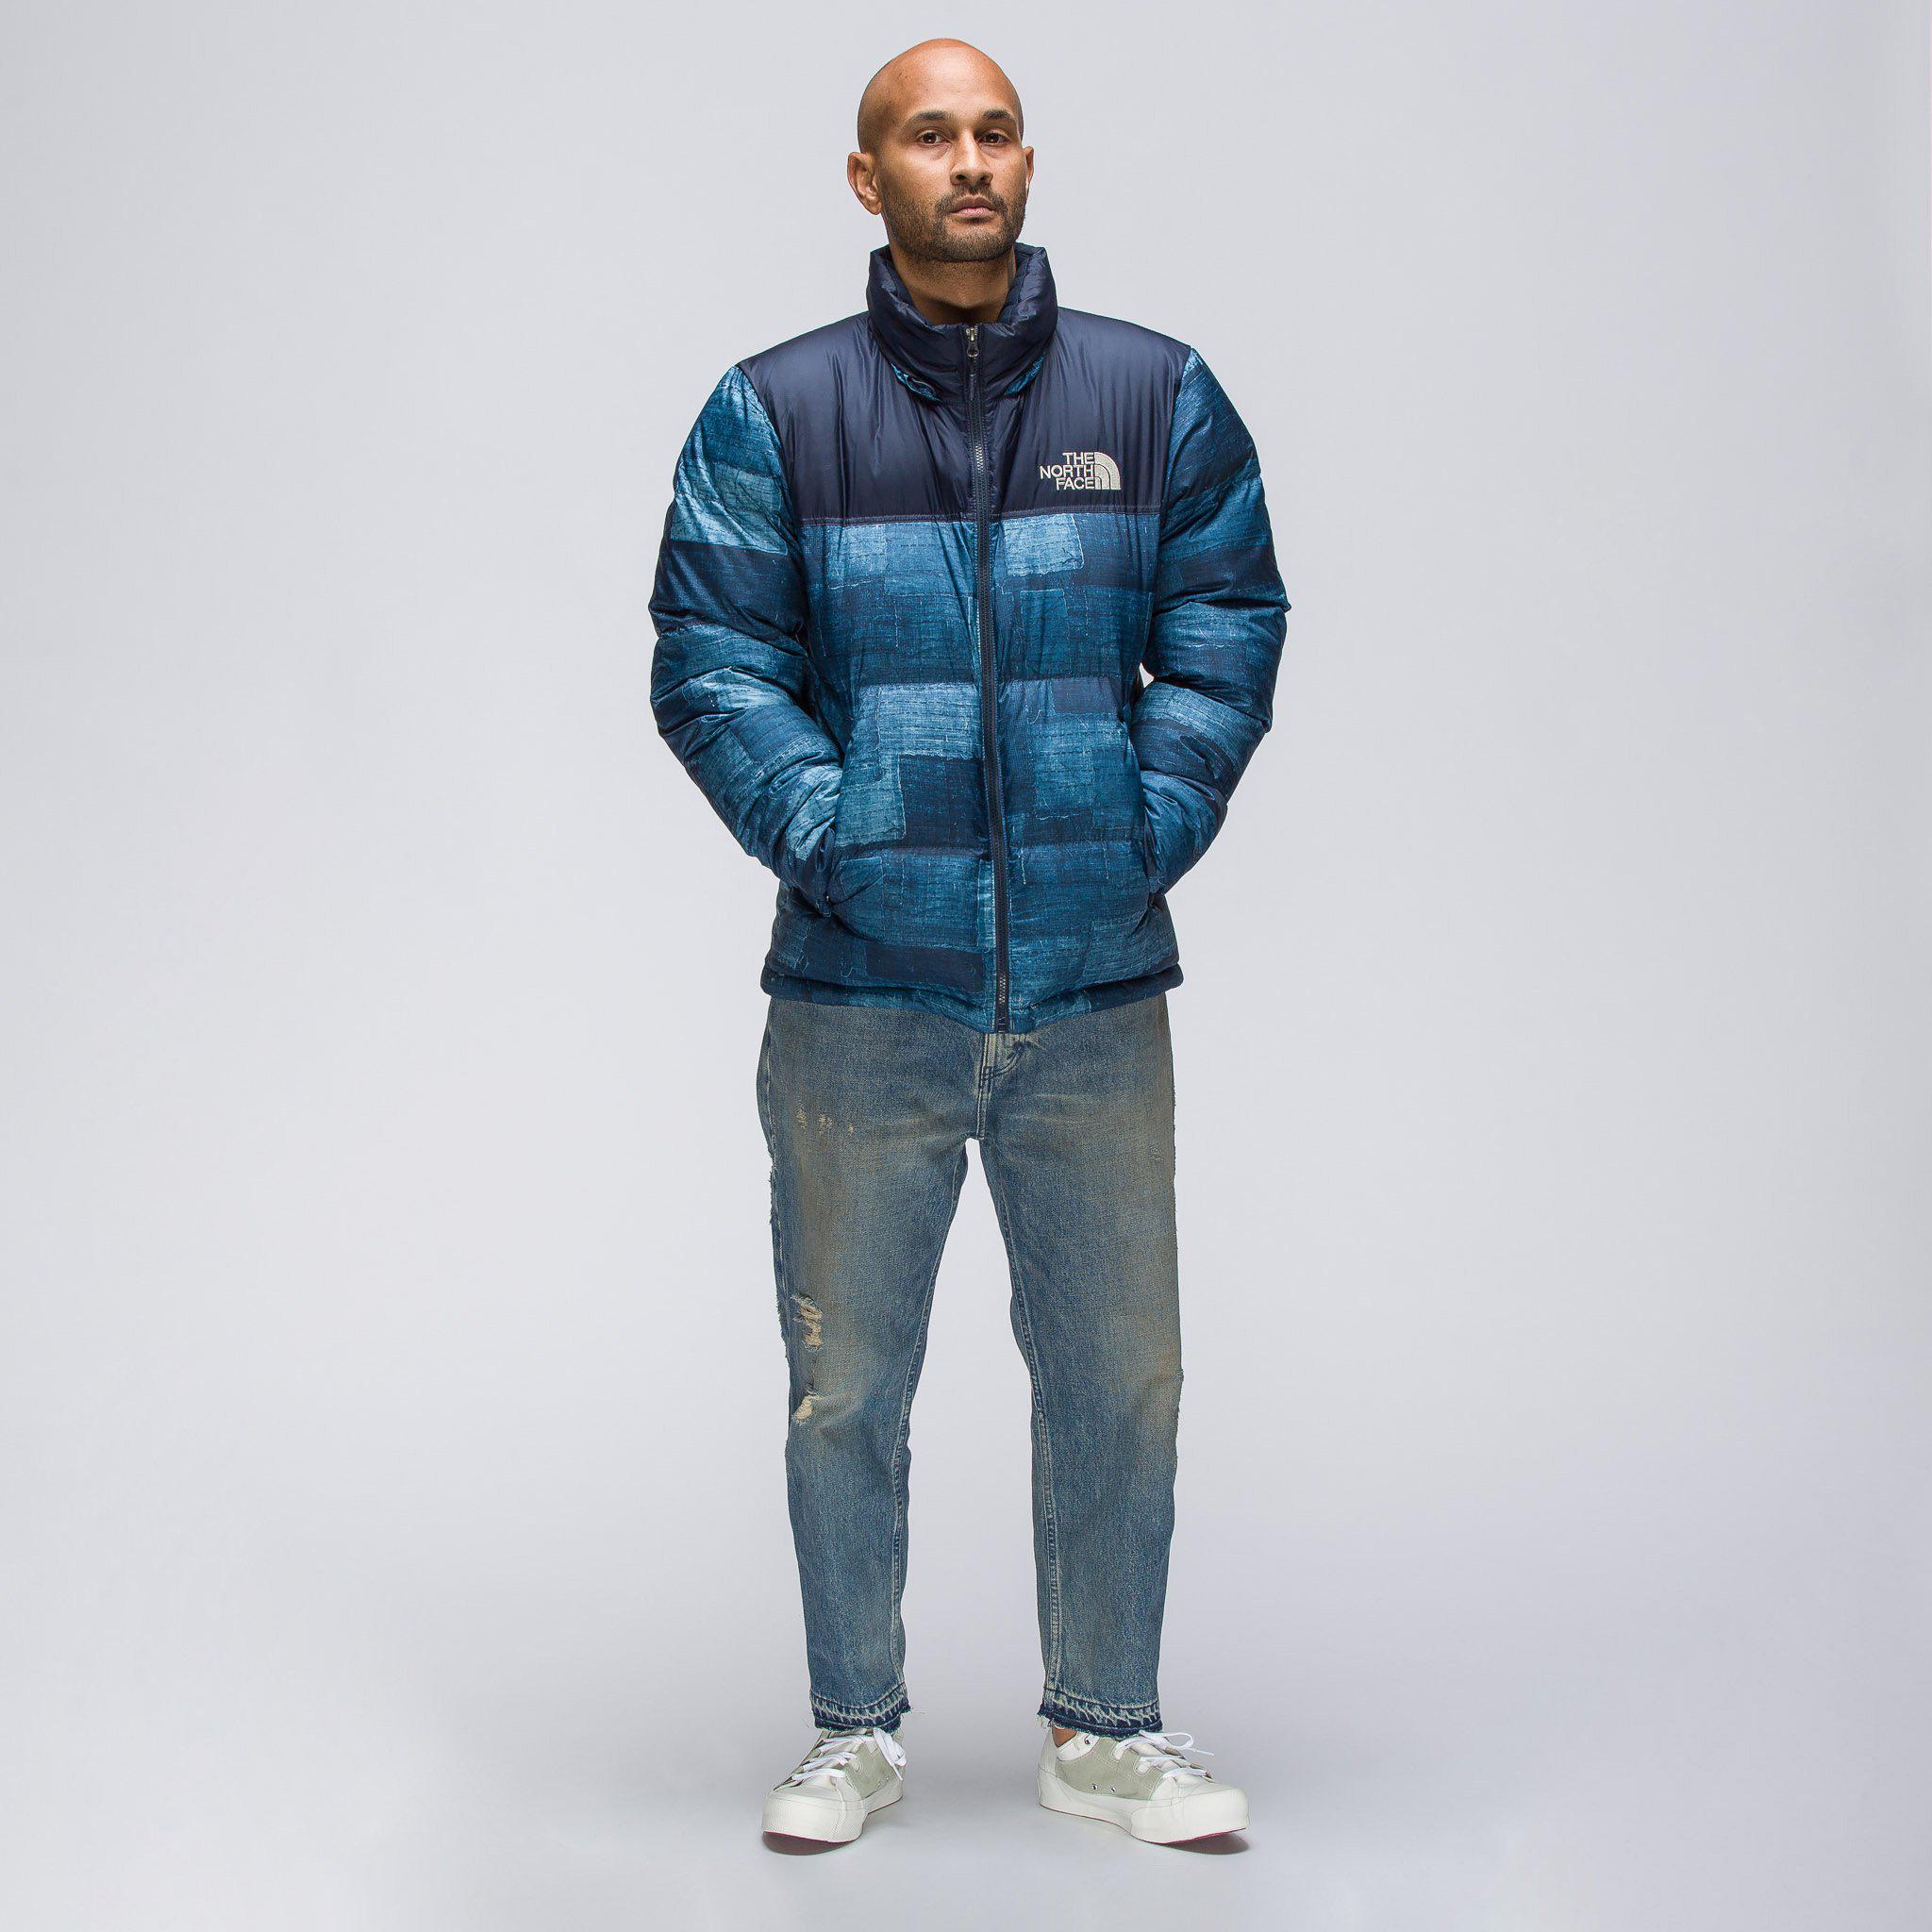 The North Face Goose Novelty Nuptse Jacket In Navy in Blue for Men - Lyst